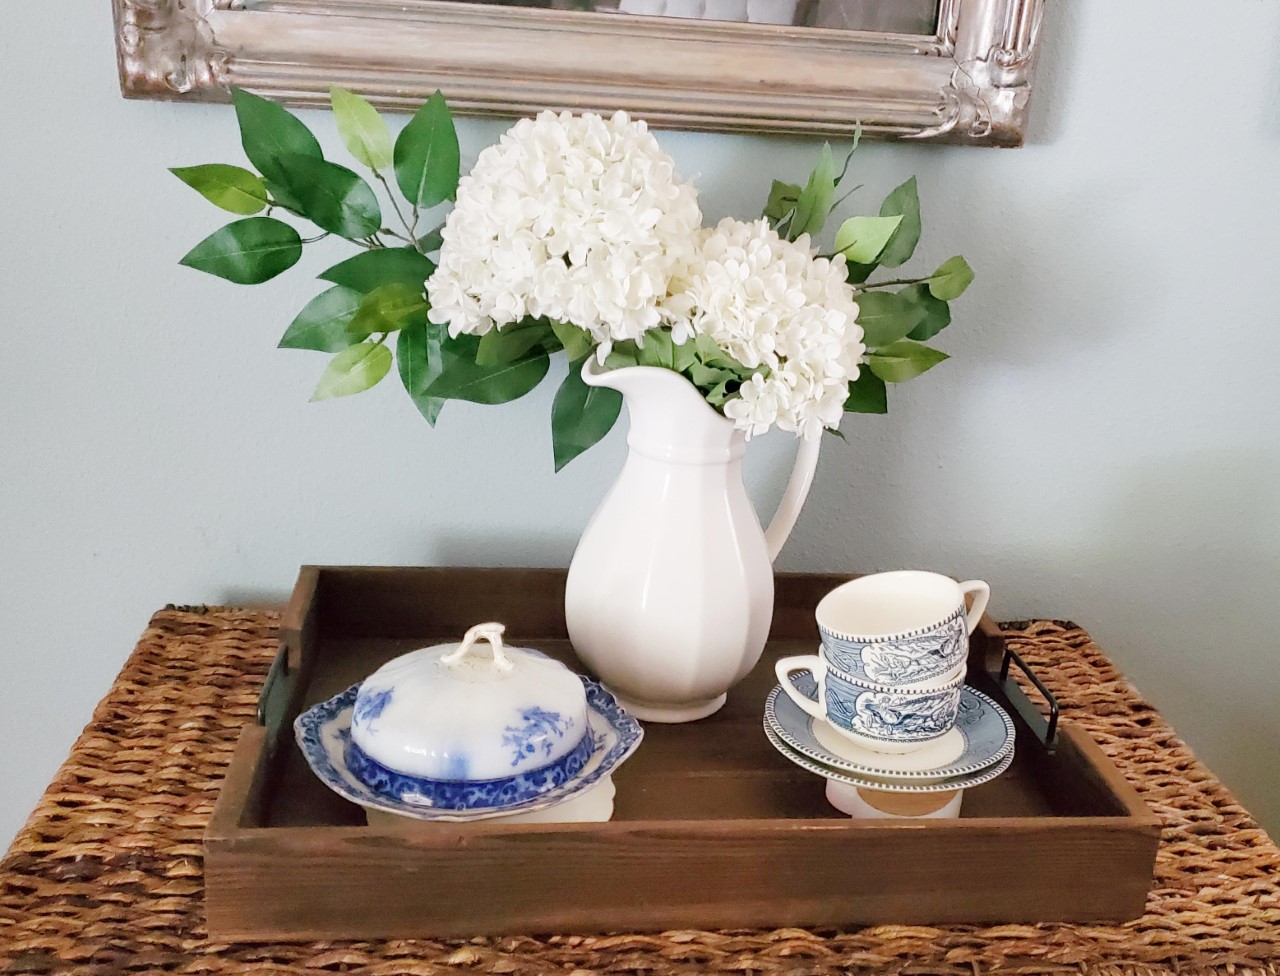 How to Style Vintage Ironstone in Your home.